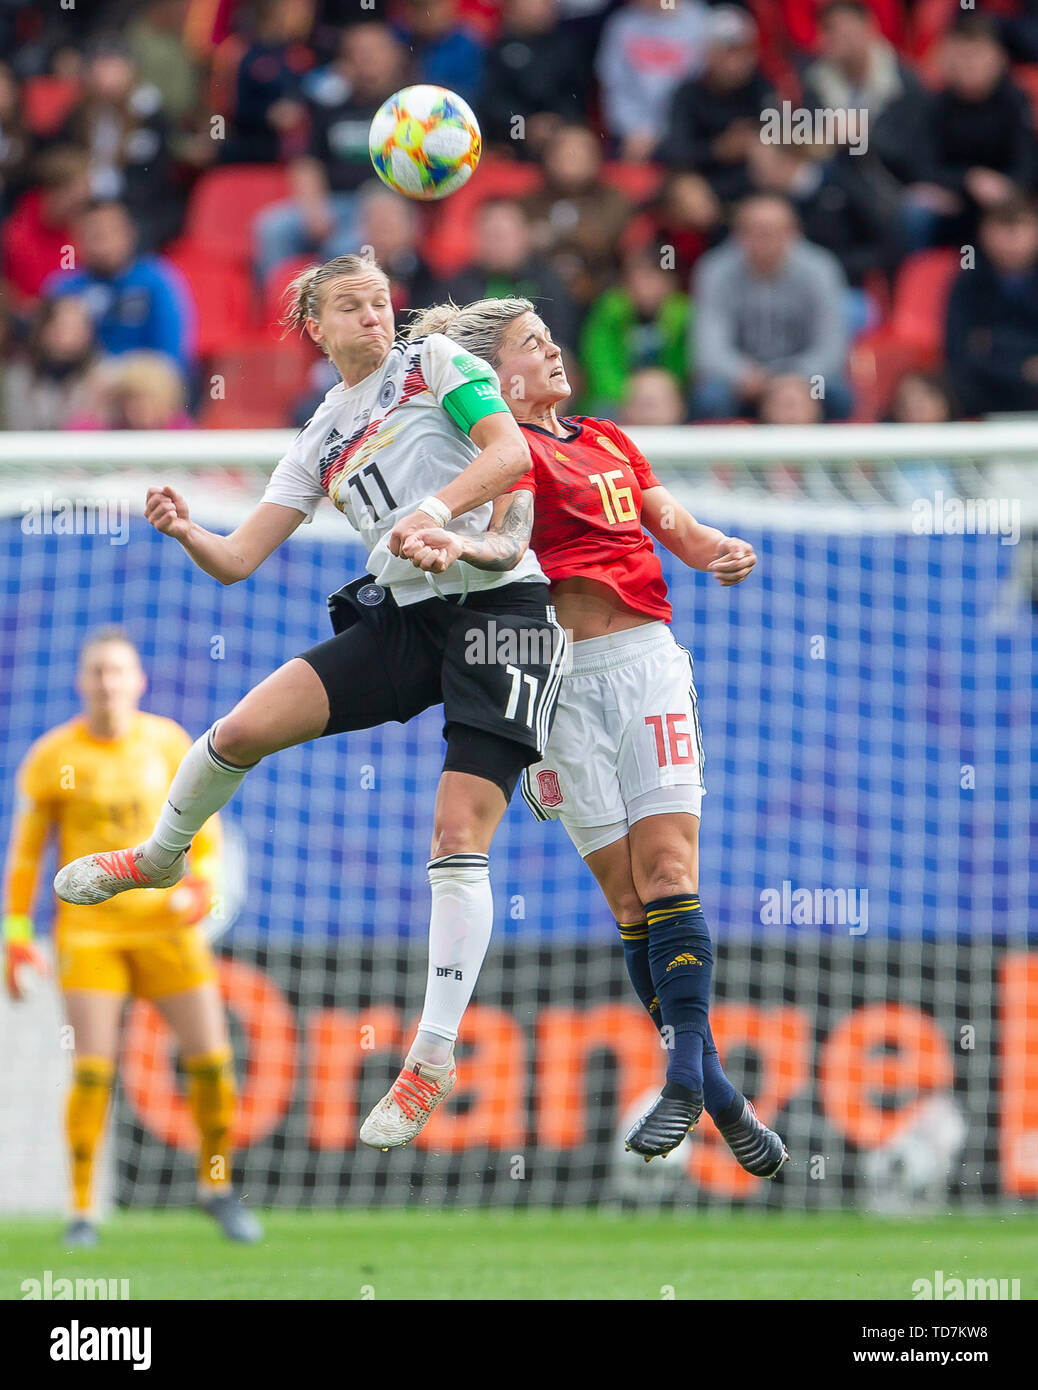 Valenciennes, Frankreich. 12th June, 2019. France, Valenciennes, Stade du Hainaut, 12.06.2019, Football - FIFA Women's World Cup - Germany - Spain Picture: vl Alexandra Popp (Germany, # 11) and Maria Leon (Spain, # 16) | usage worldwide Credit: dpa/Alamy Live News Stock Photo